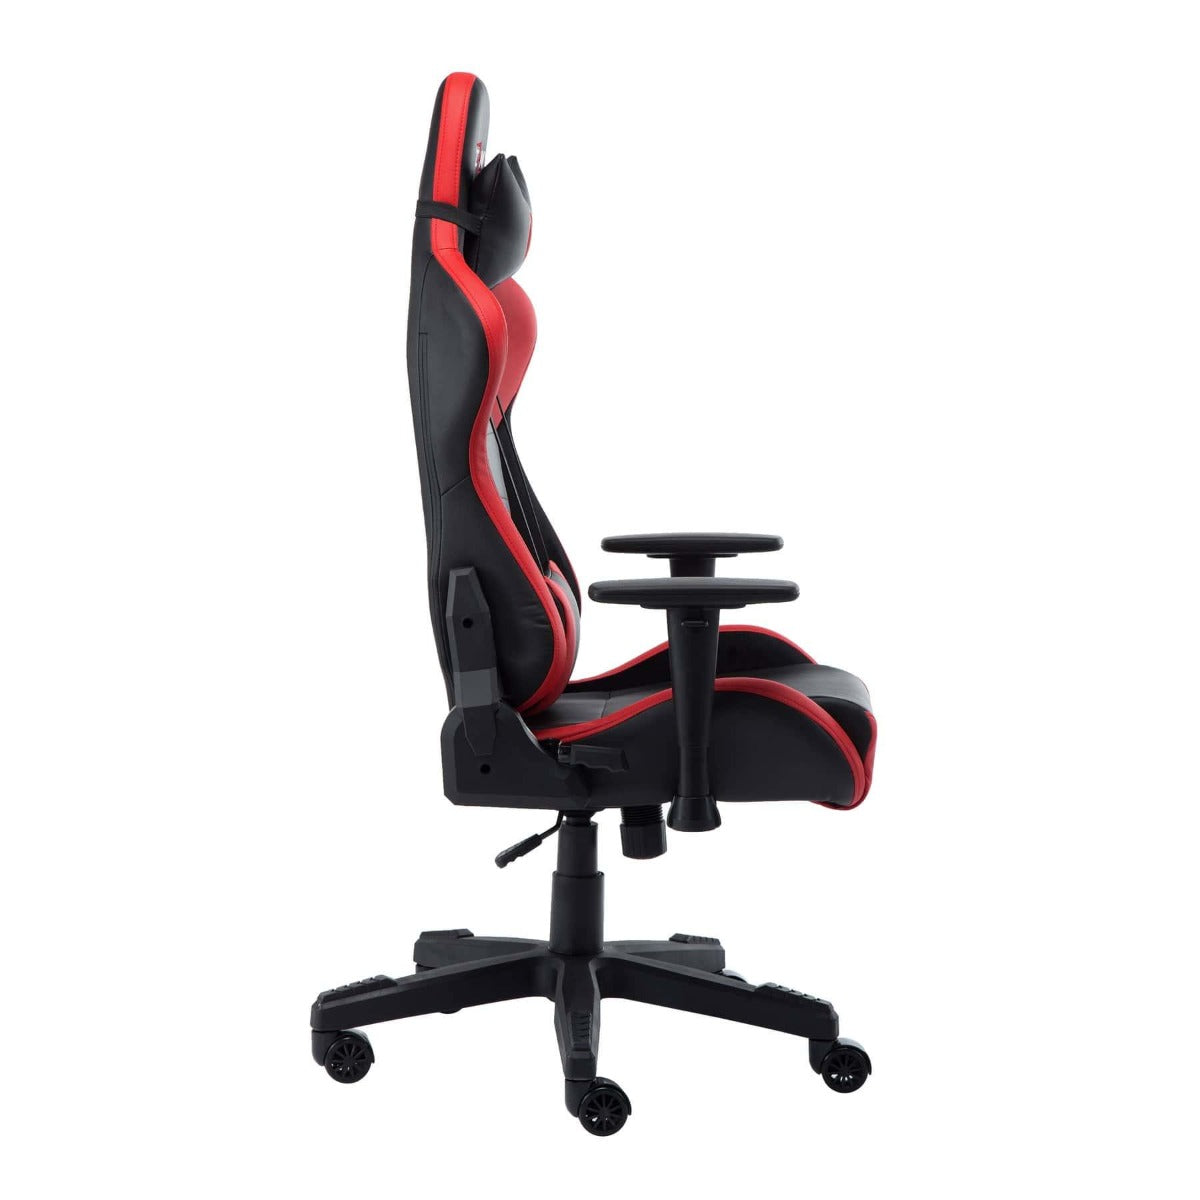 Techni Sport TS-90 Red Office-PC Gaming Chair RTA-TS90-RED Side